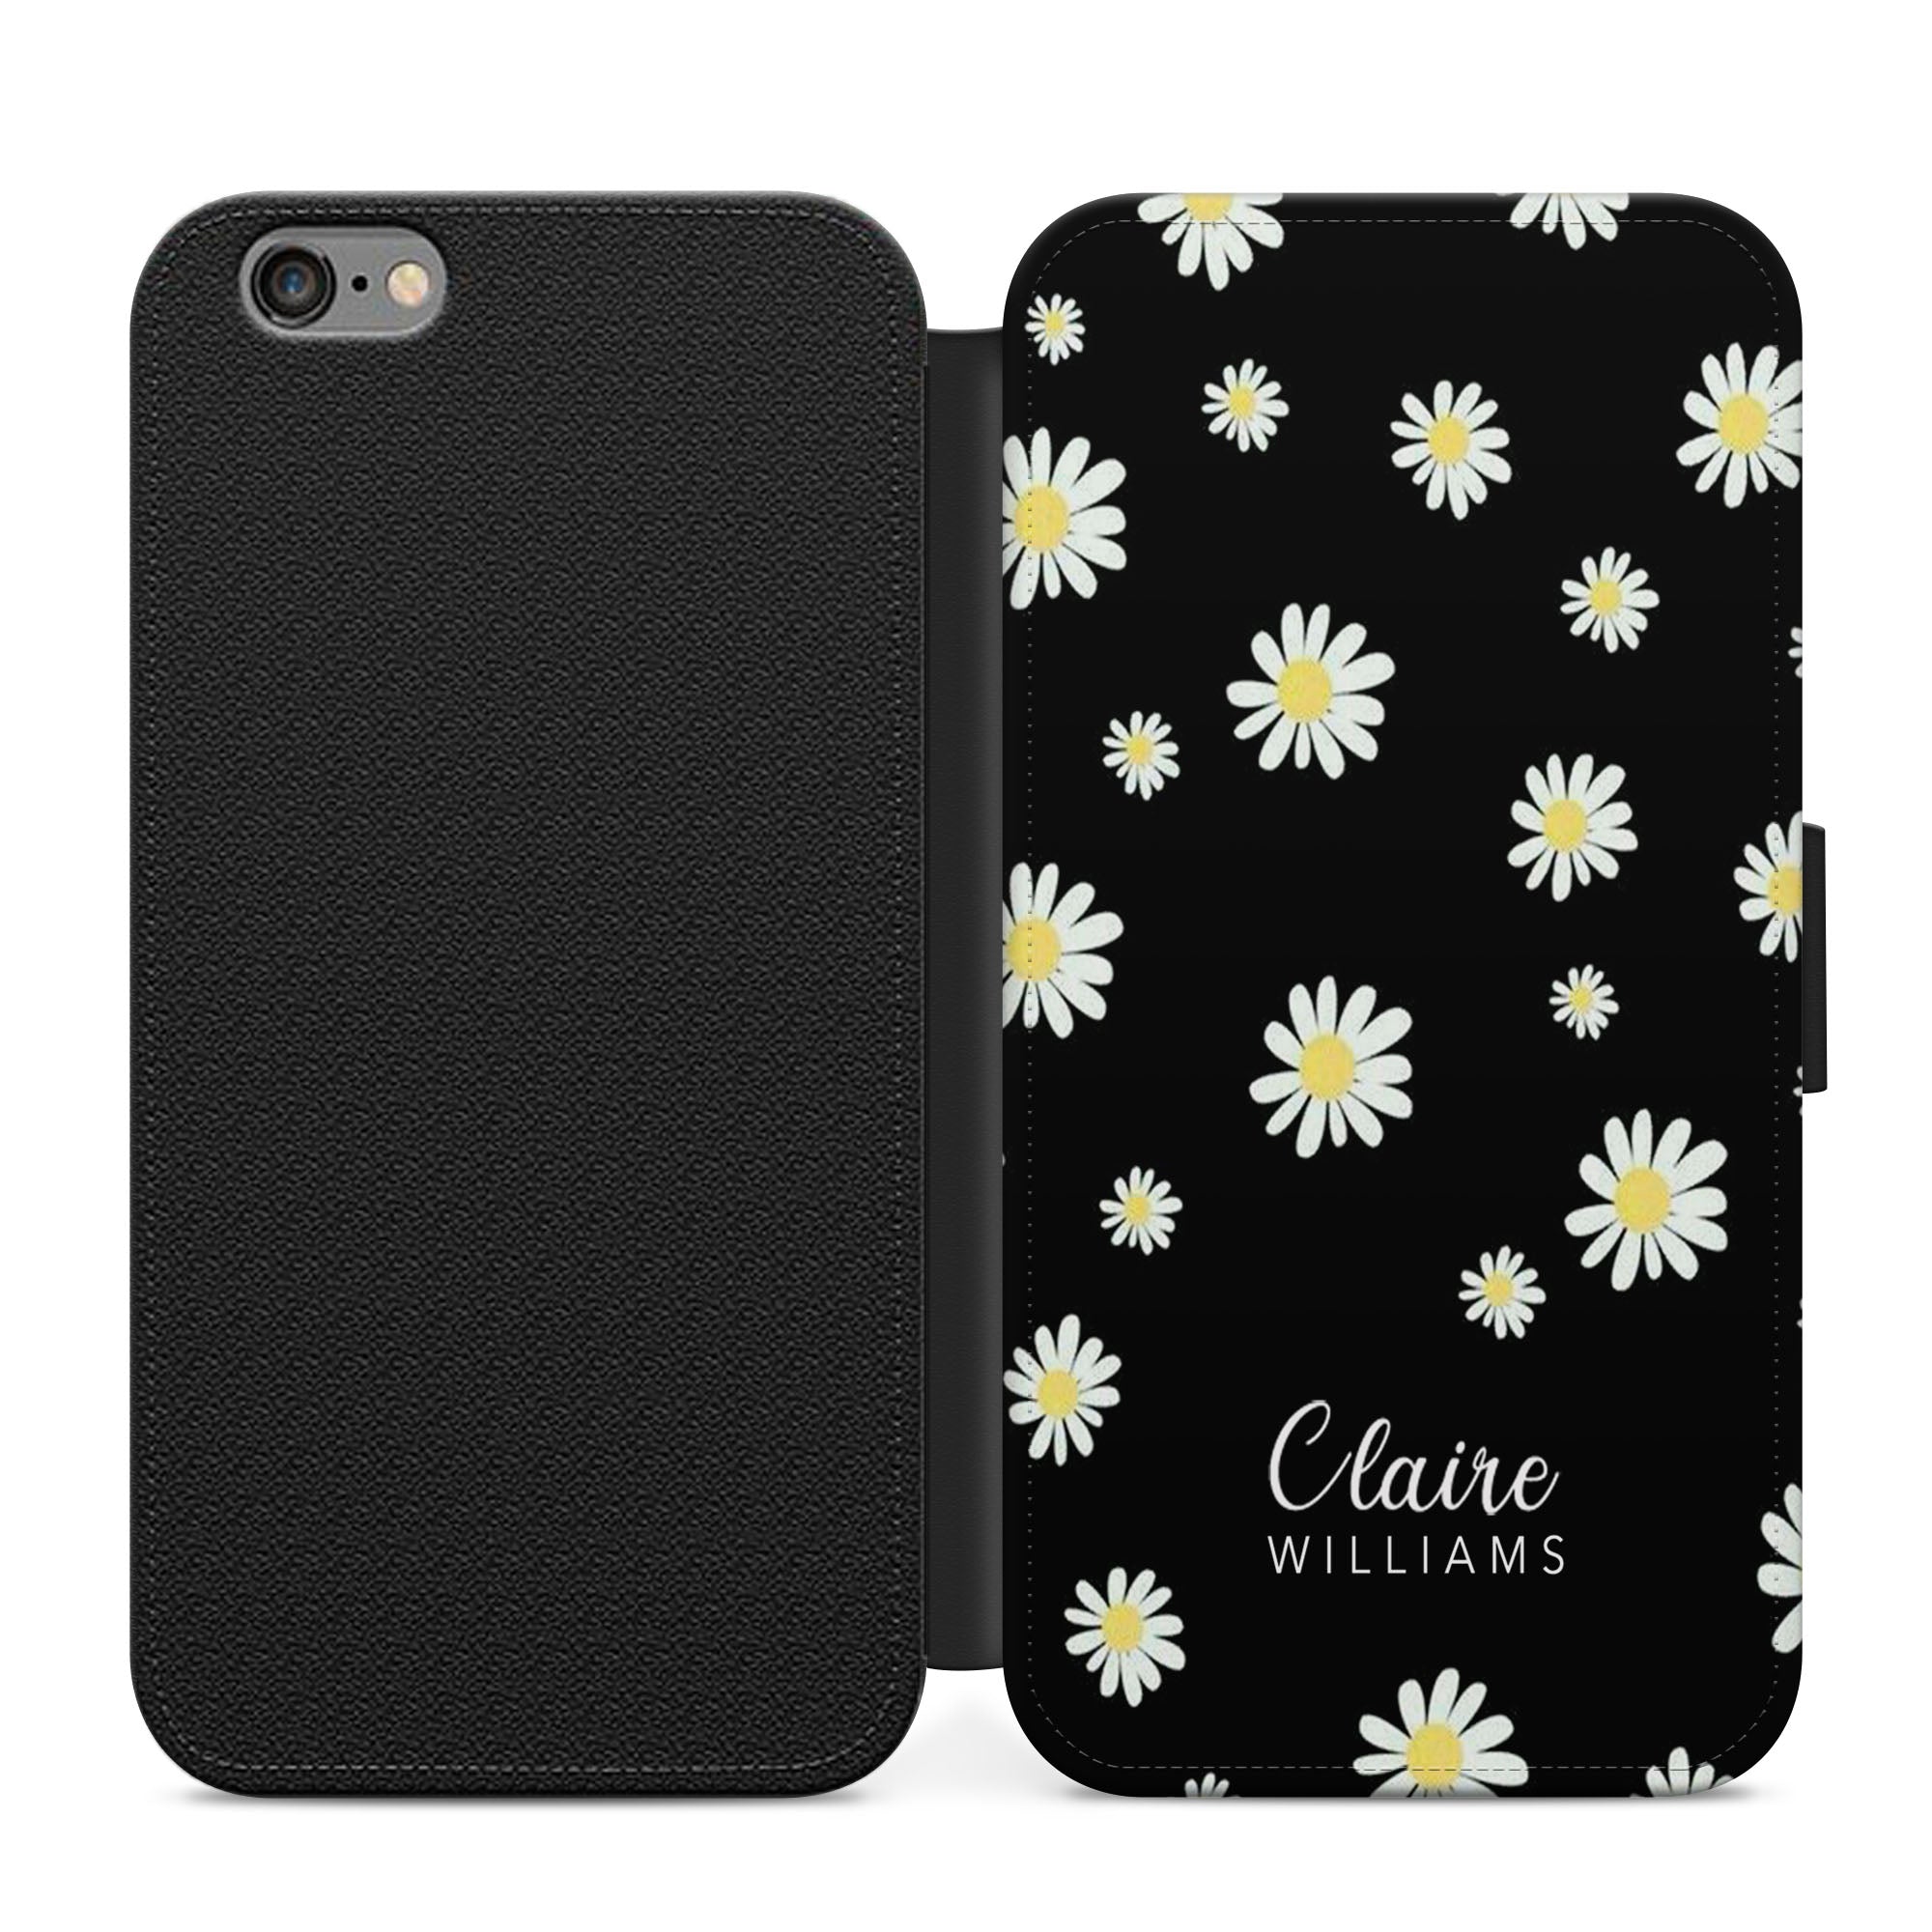 Personalised Daisy Faux Leather Flip Case Wallet for iPhone / Samsung